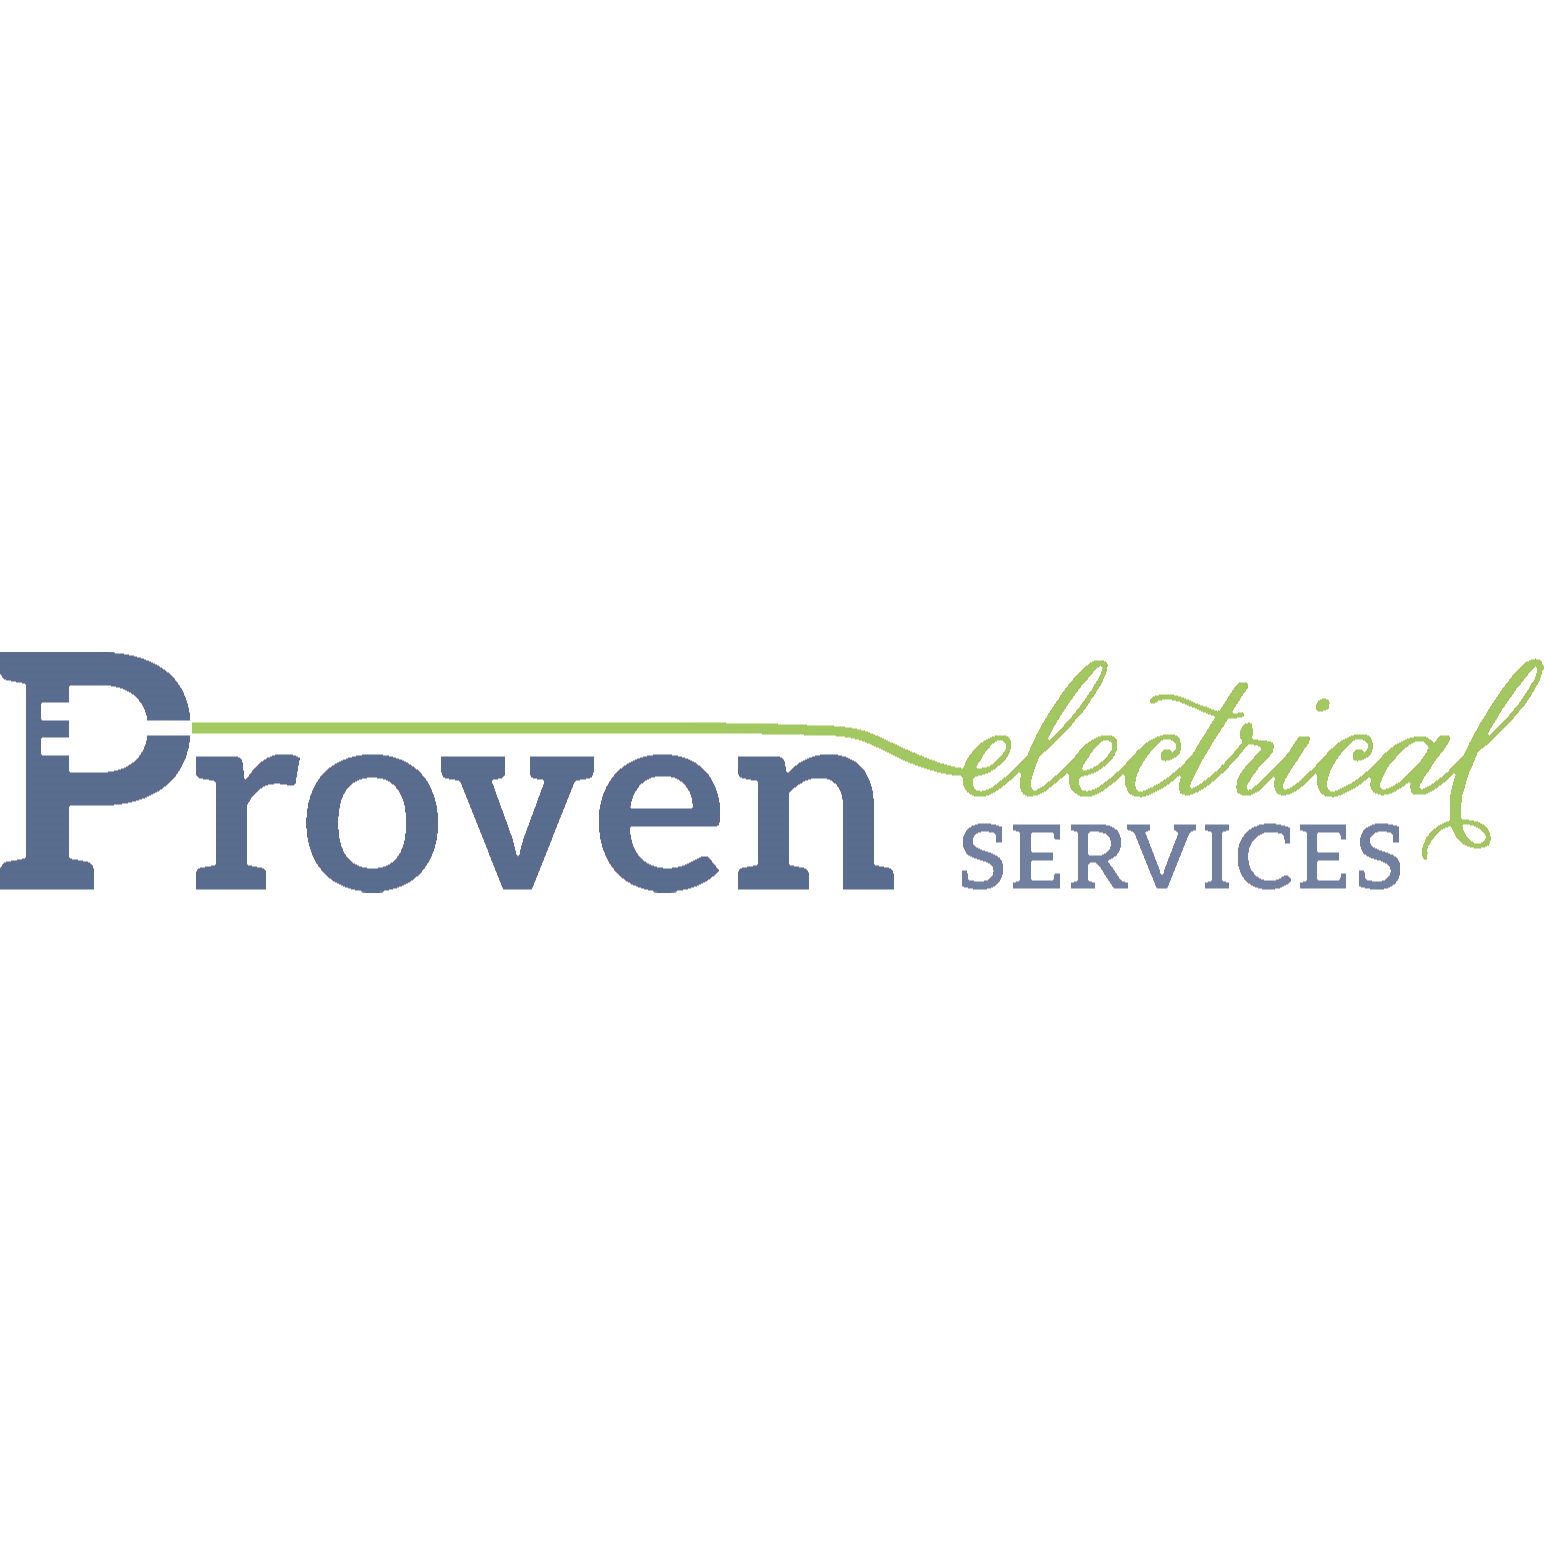 Proven Electrical Services Corporation